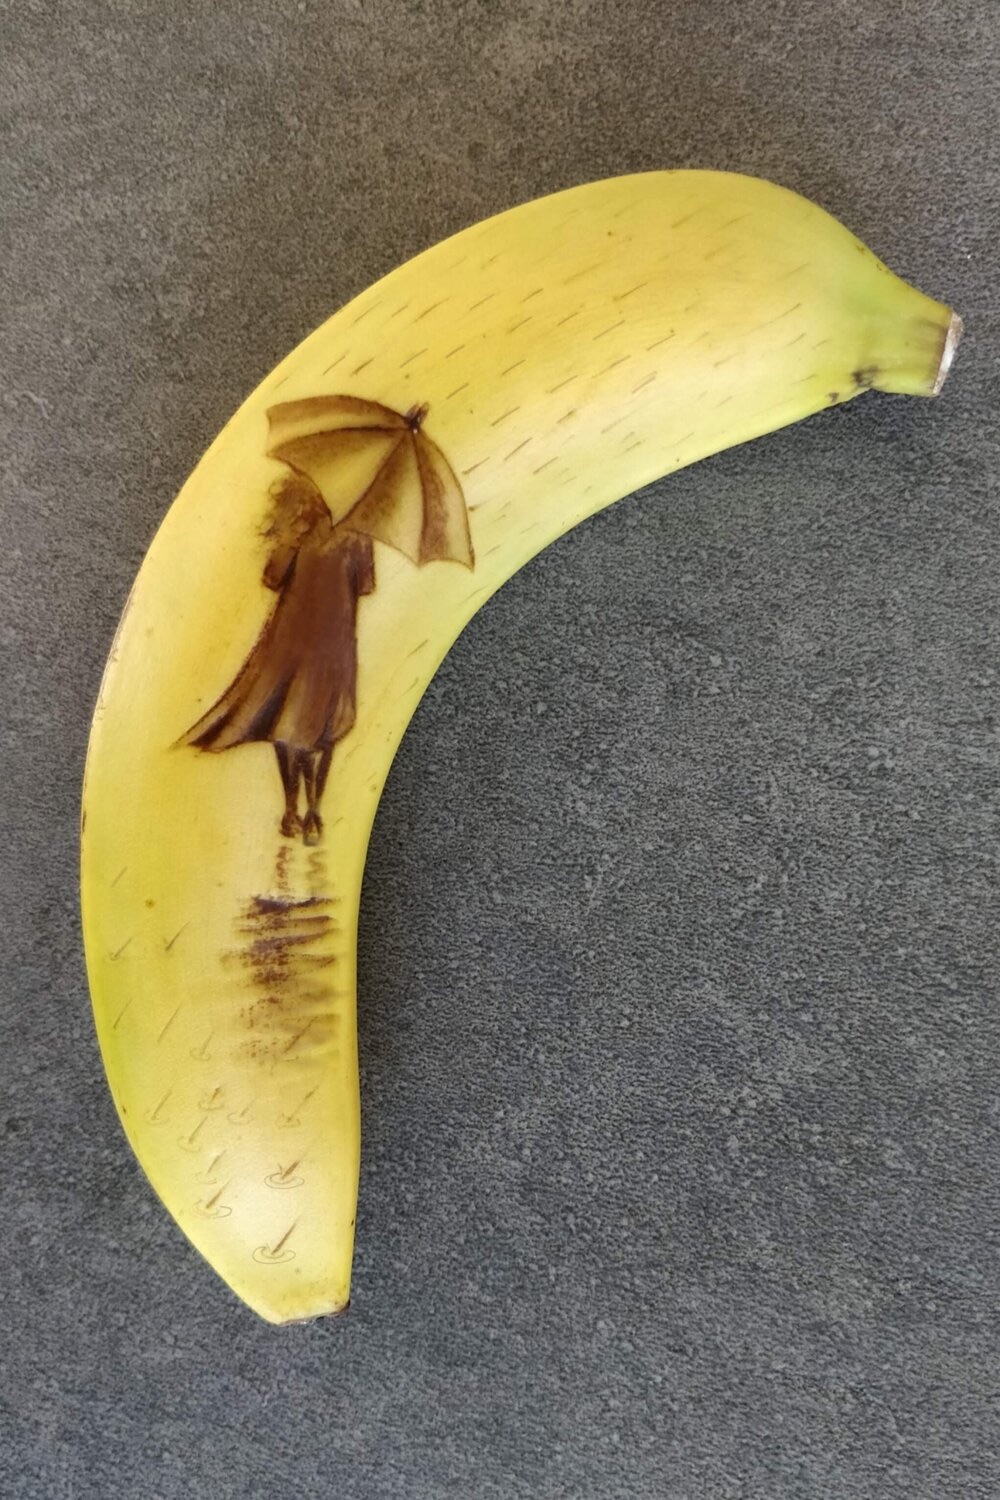 art of a girl with an umbrella in the rain imprinted on a banana